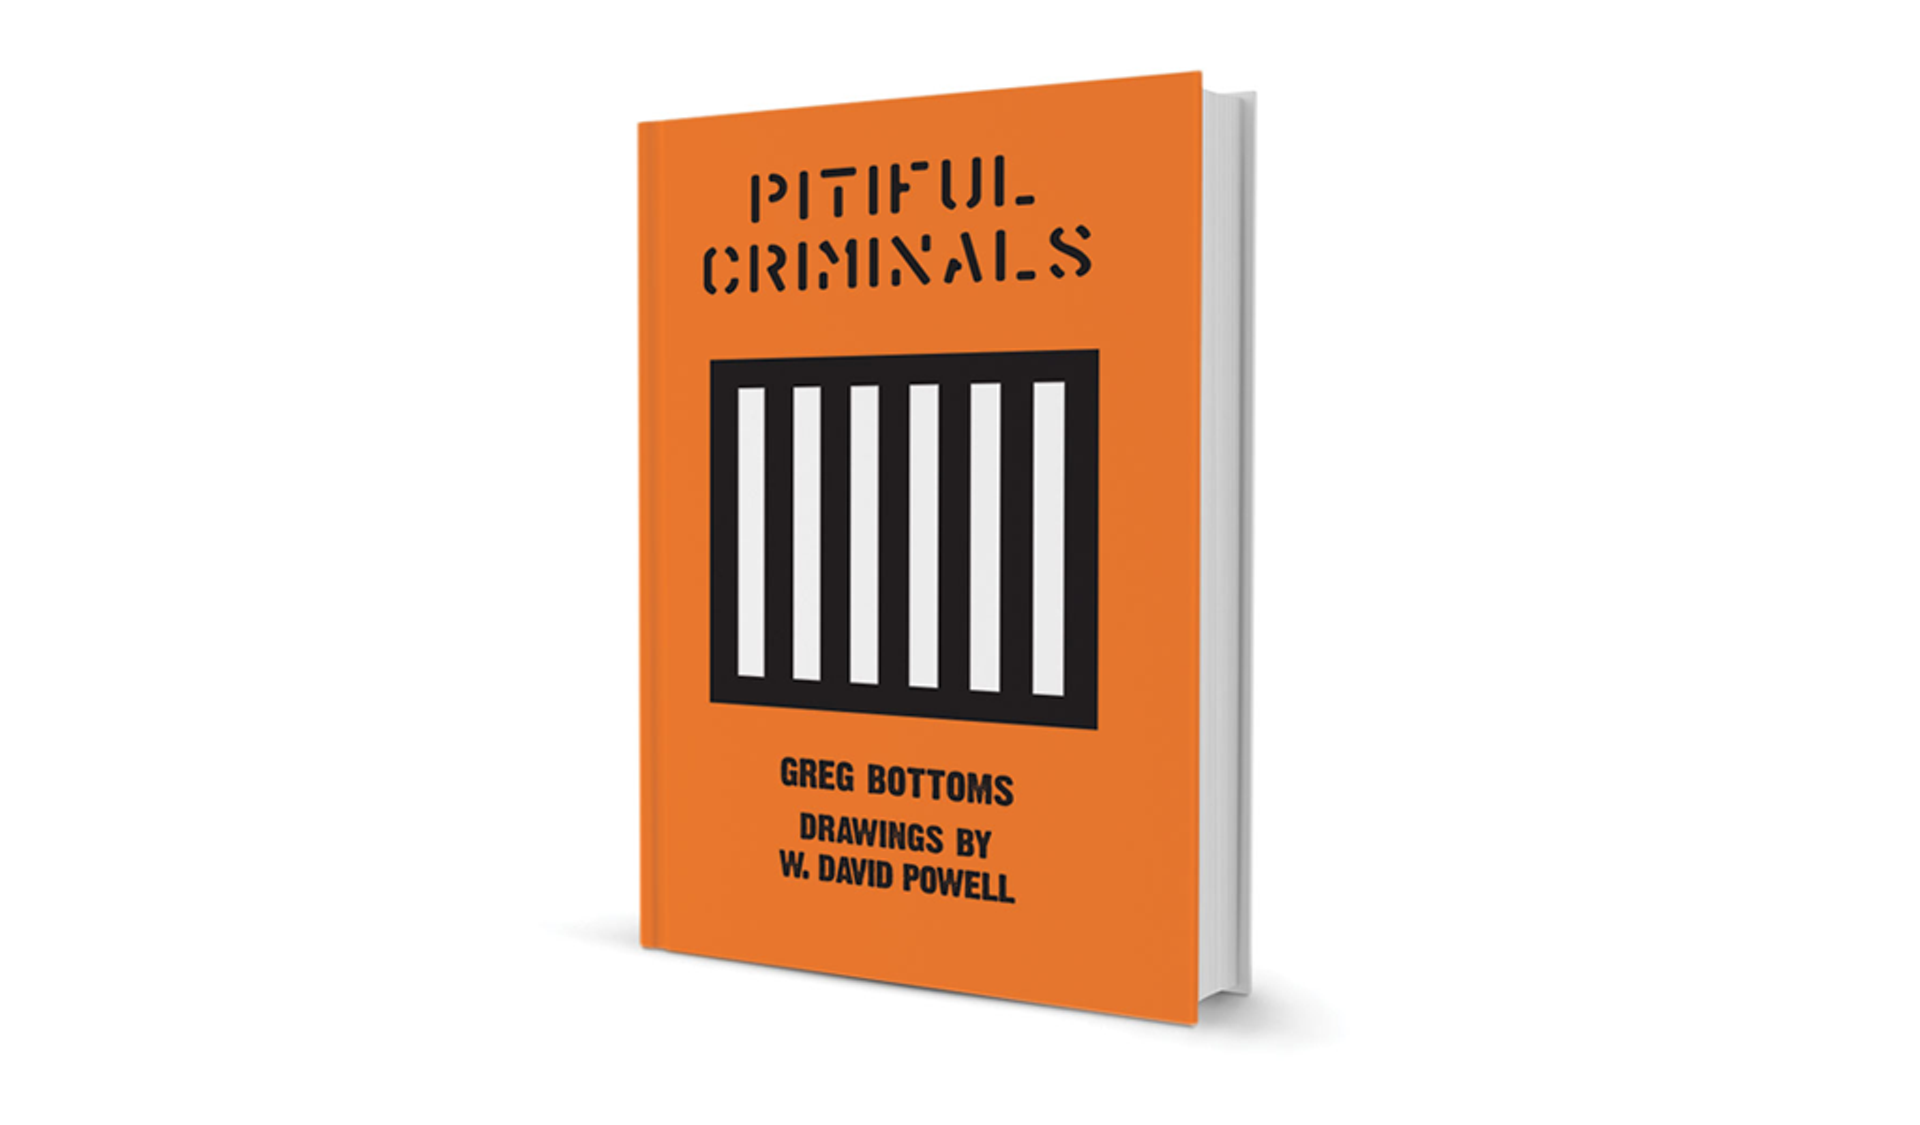 Pitiful Criminals by Greg Bottoms, drawings by W. David Powell, Counterpoint Press, &#10;203 pages. $16.95